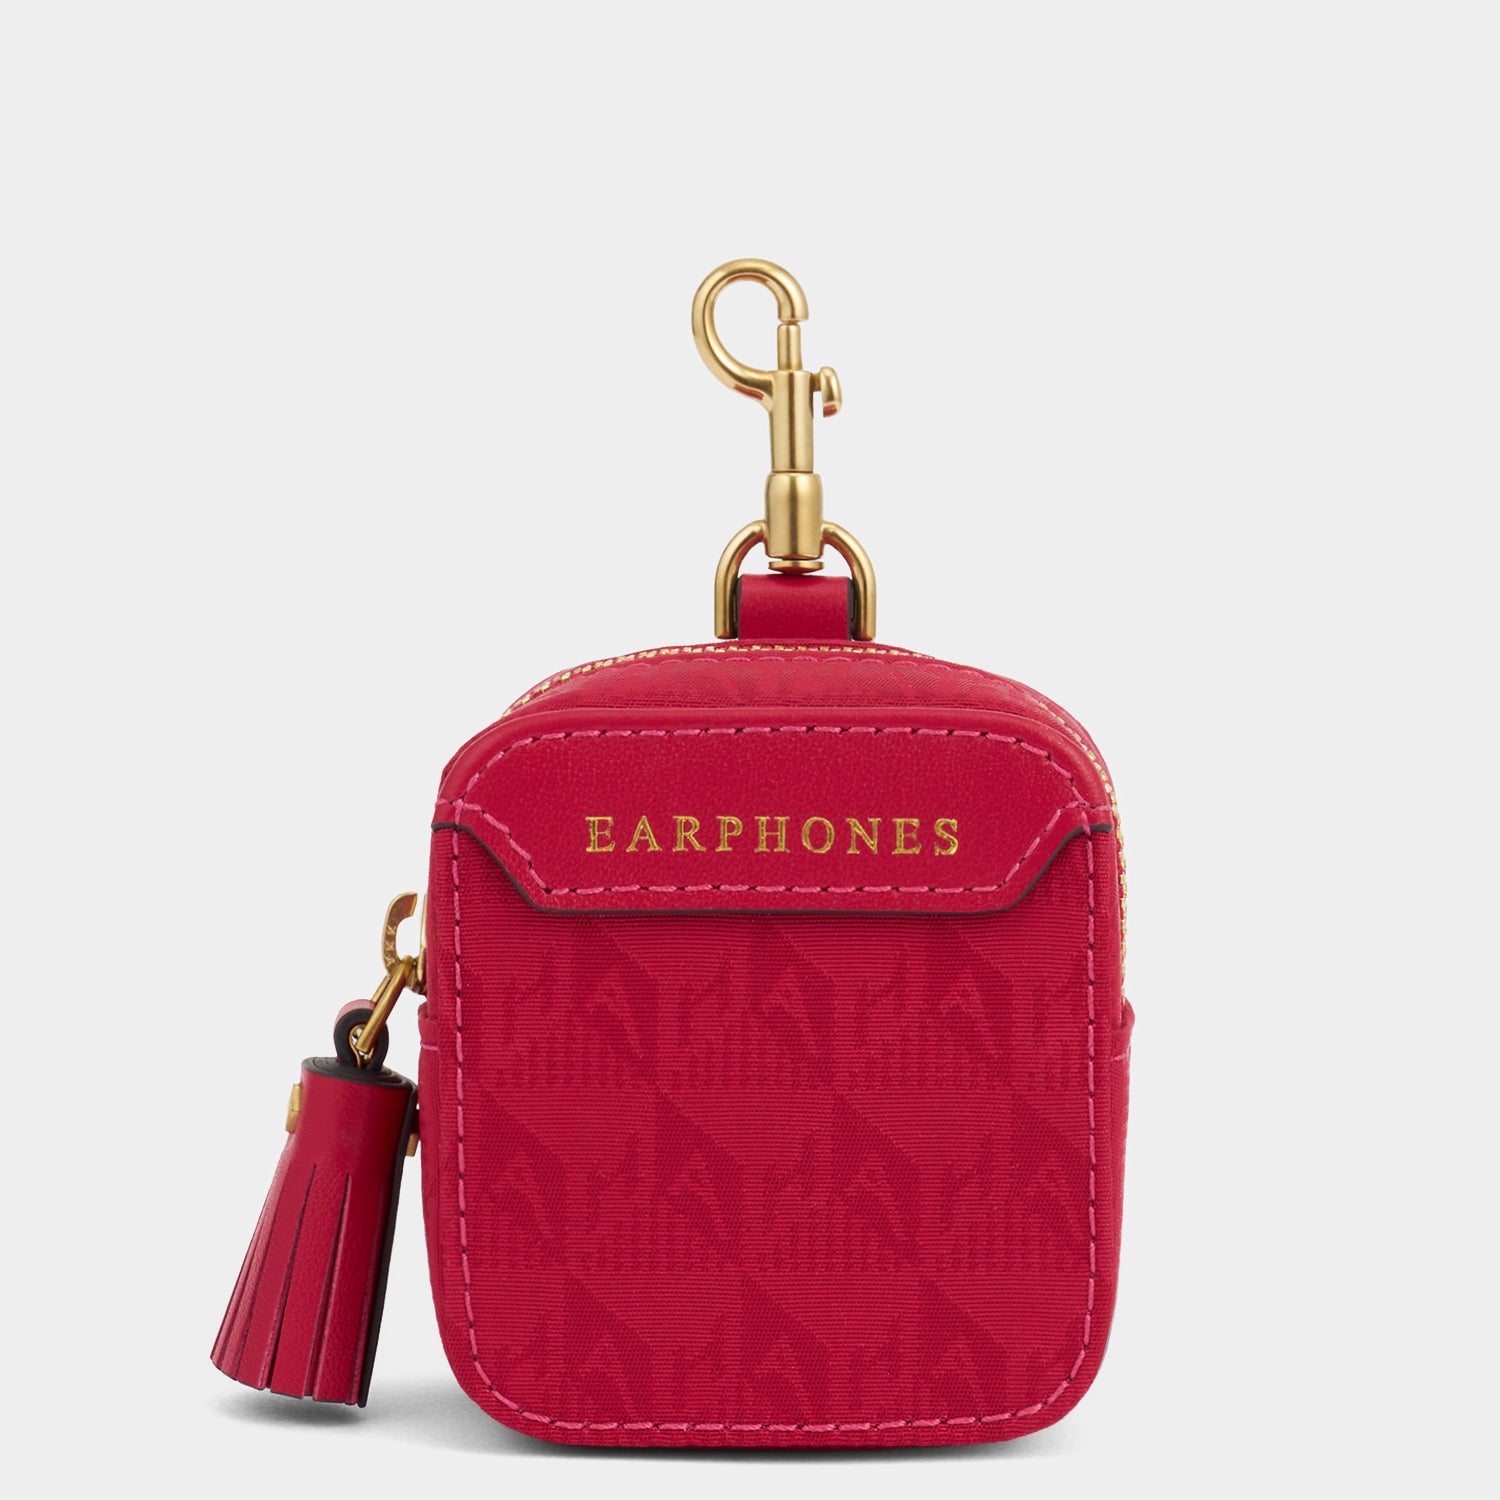 Logo Ear Phones Travel Pouch -

                  
                    Jacquard Nylon Pouch in Magenta -
                  

                  Anya Hindmarch UK
